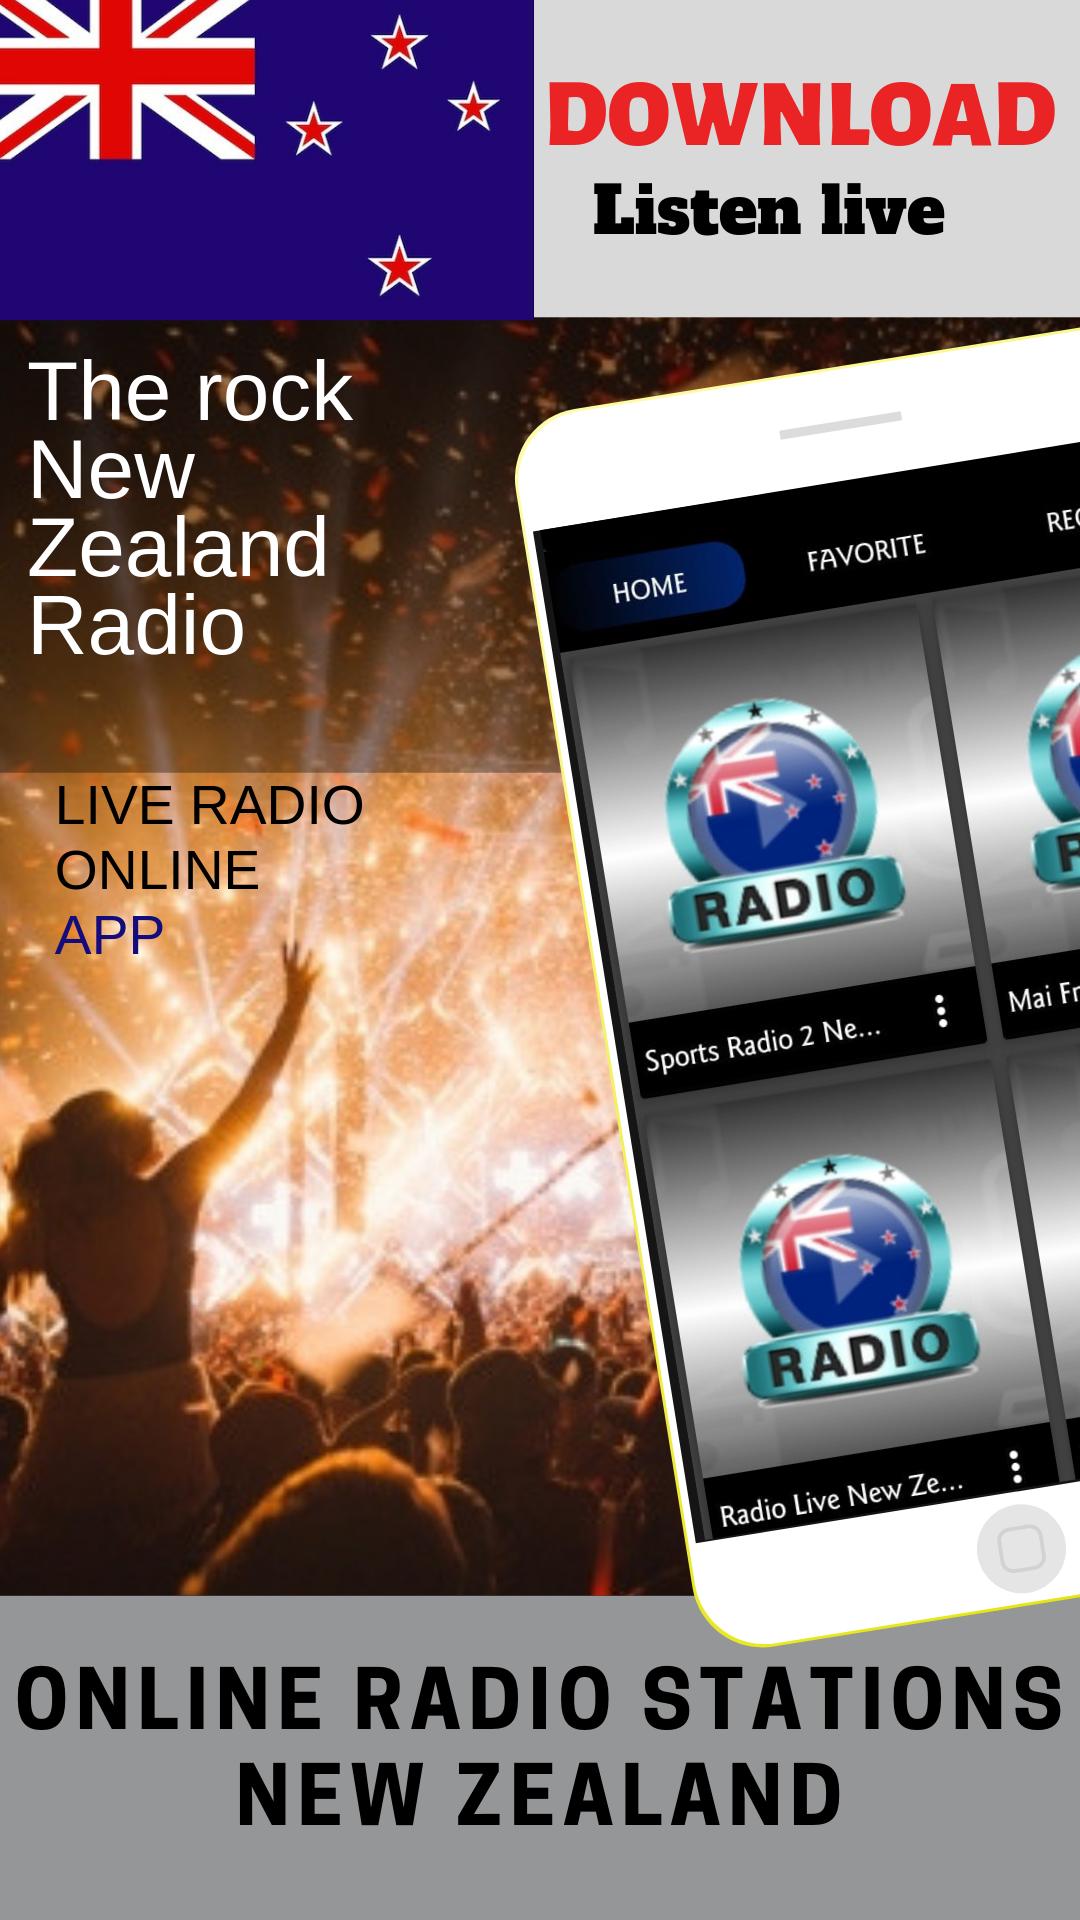 The rock New Zealand Radio Free Online for Android - APK Download